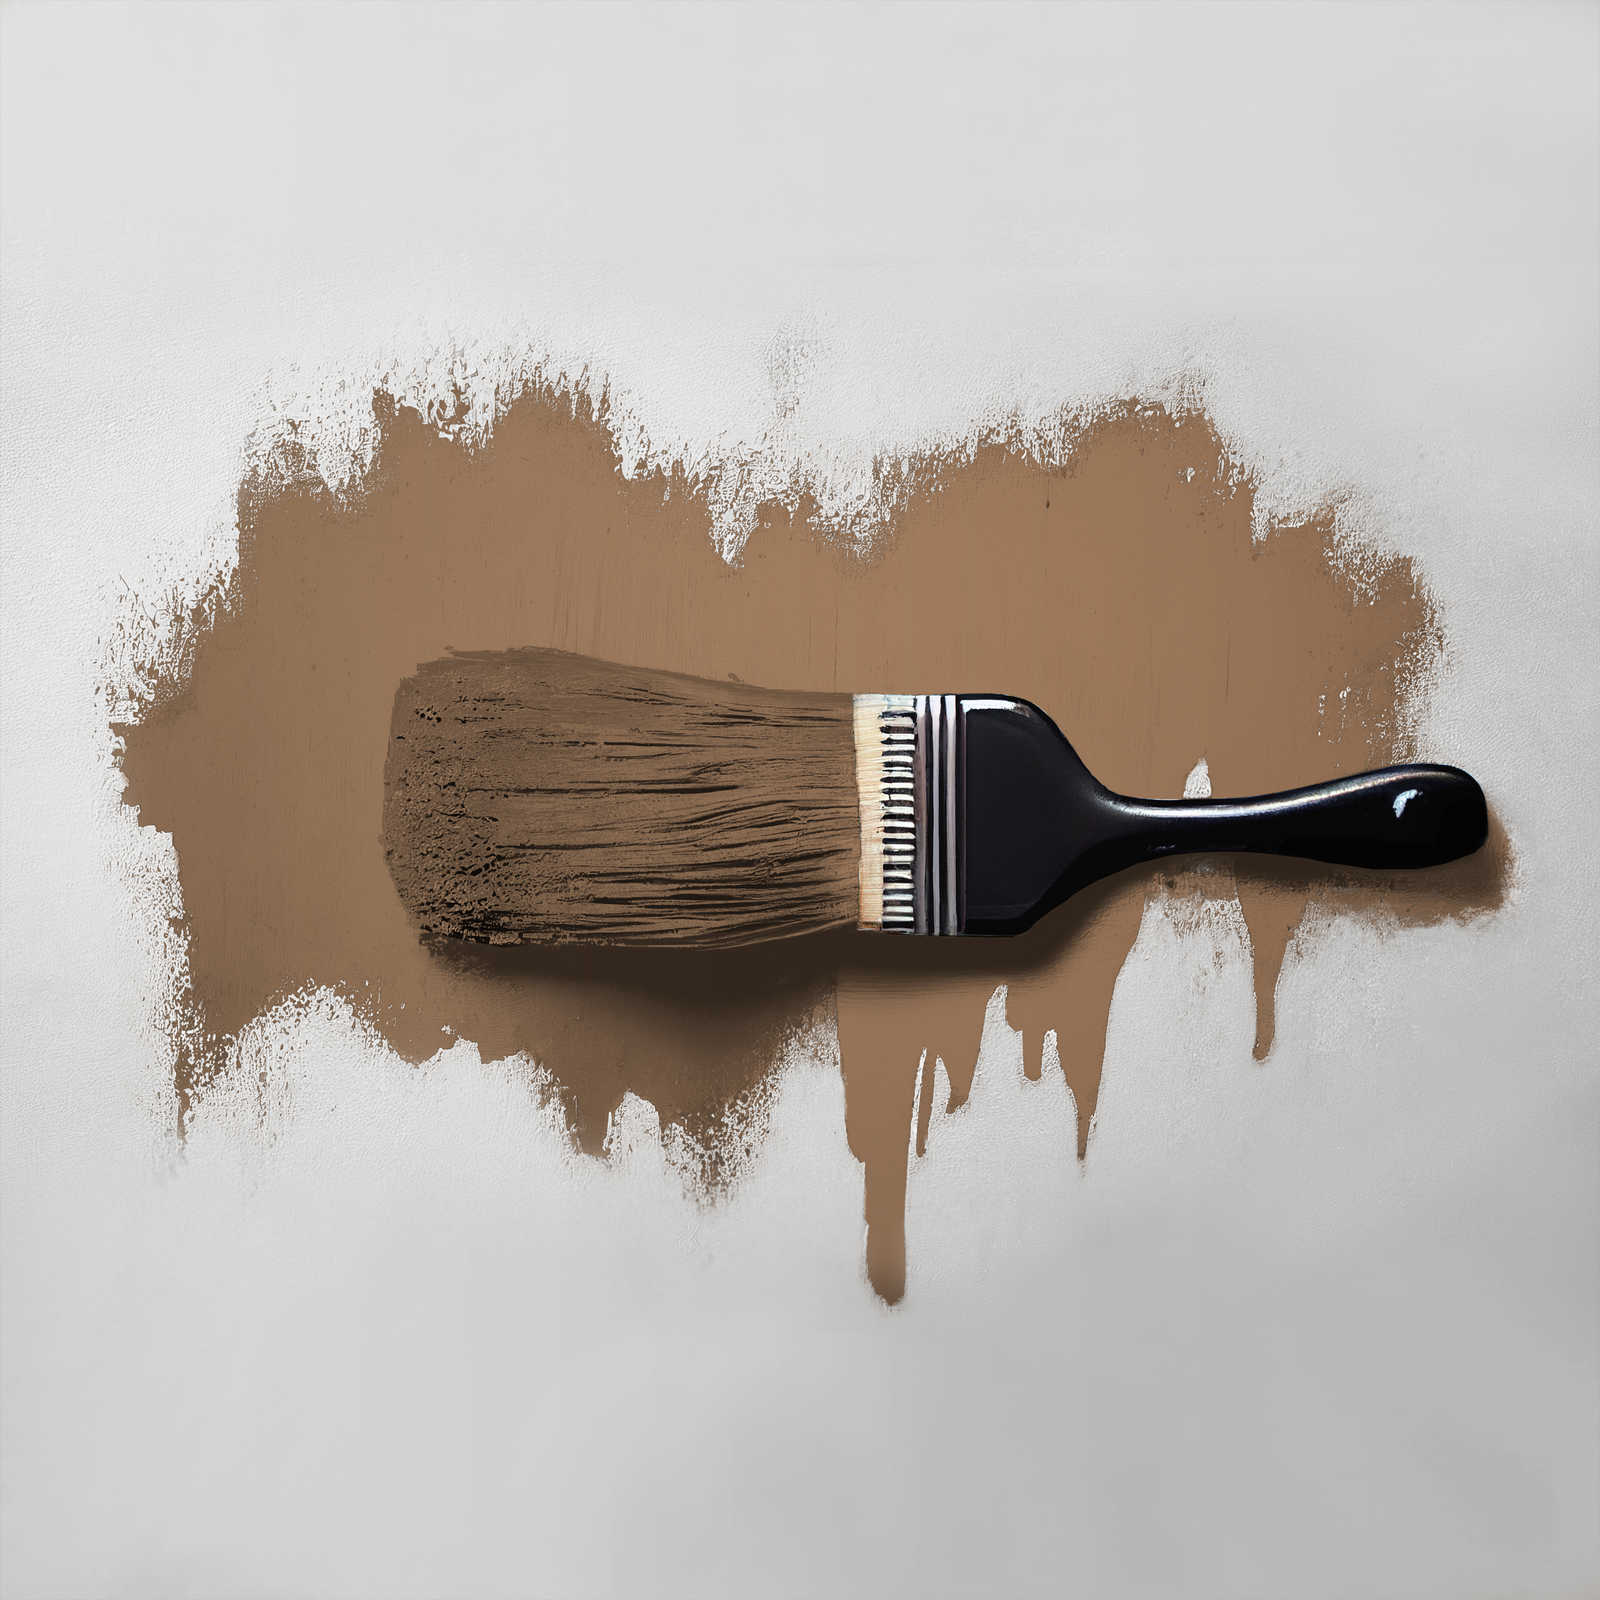             Wall Paint TCK6007 »Awesome Anis« in cosy brown – 5.0 litre
        